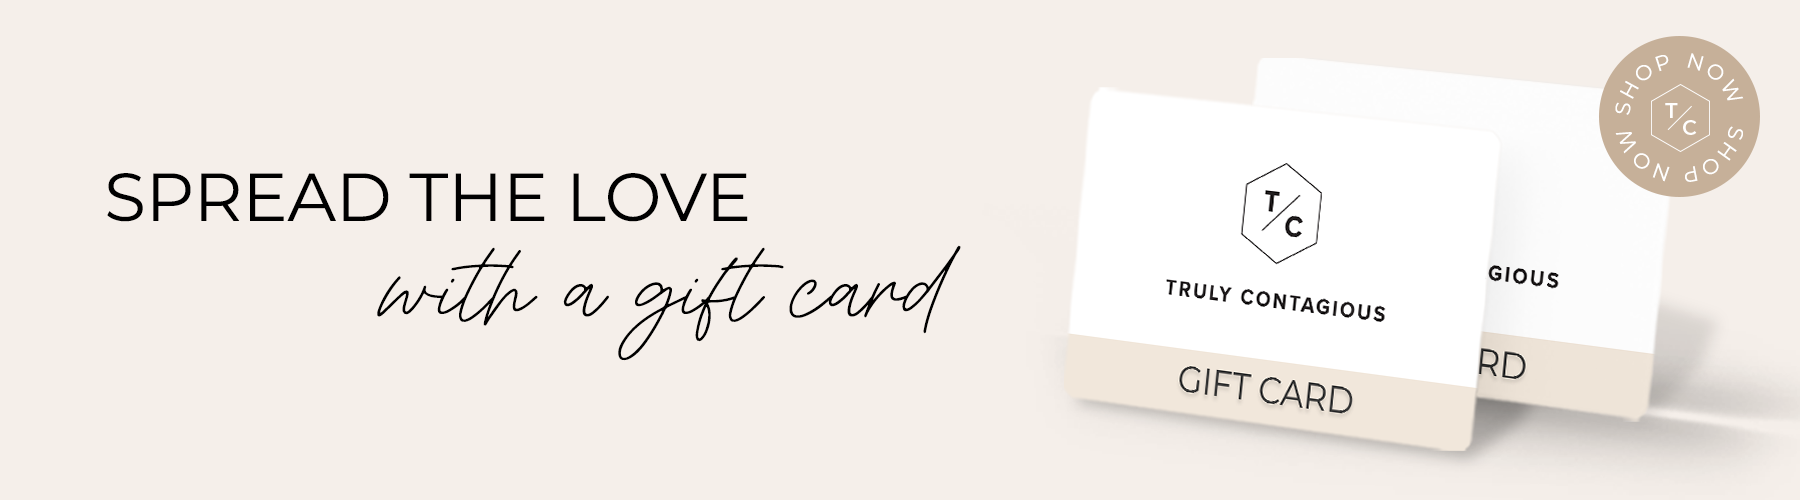 Spread the love with a Truly Contagious Gift Card